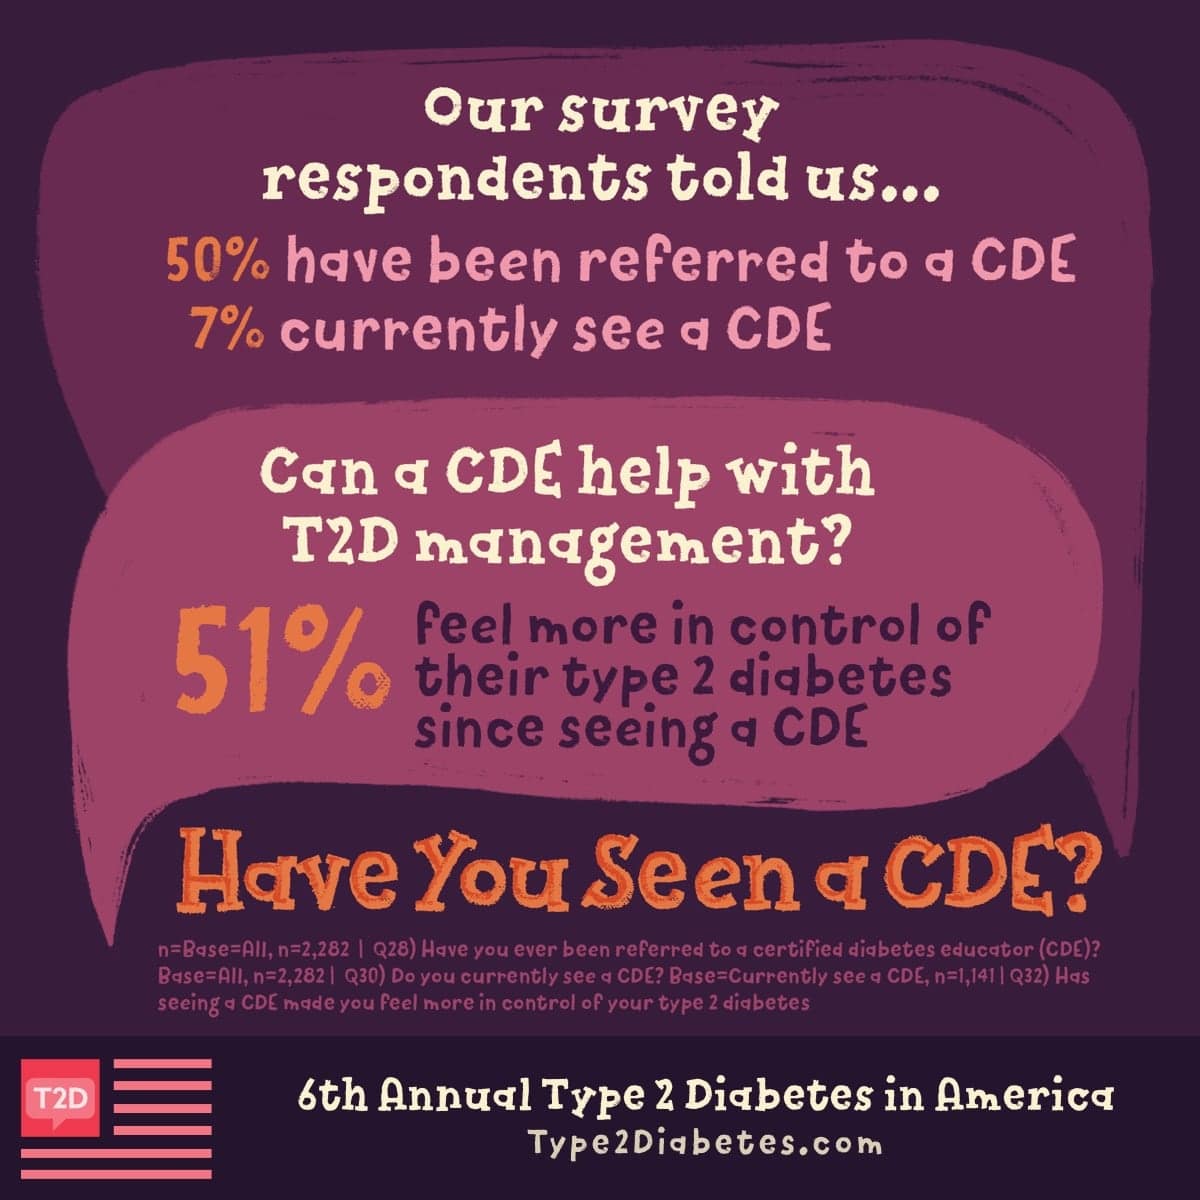 50% of our survey respondents have been referred to a certified diabetes educator but only 7% are currently seeing one.